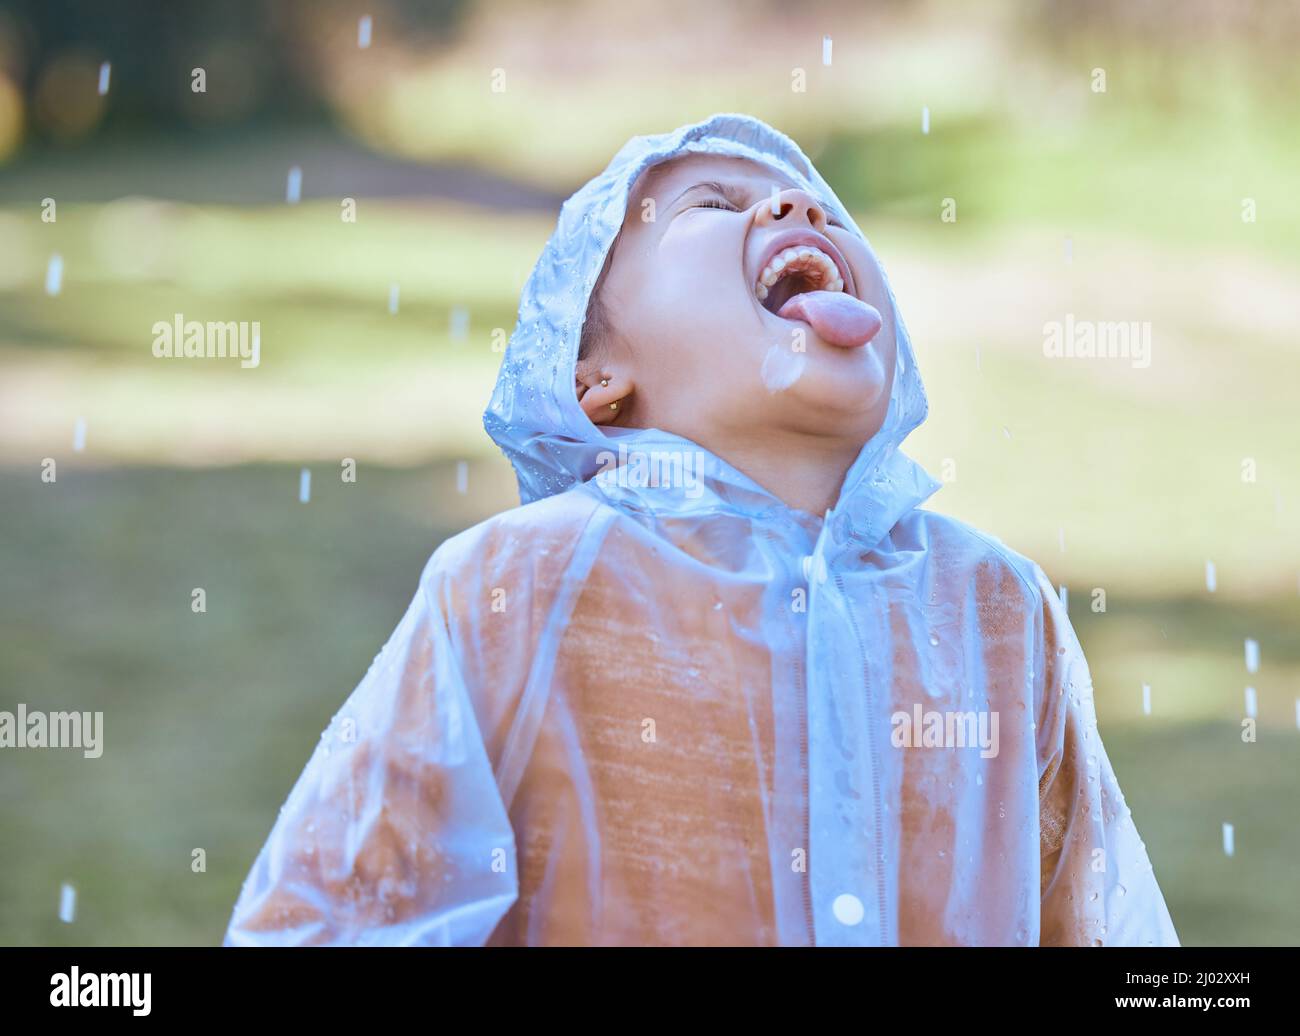 Like water from the heavens. Shot of a little girl sticking her tongue out to catch the rain drops in her mouth. Stock Photo